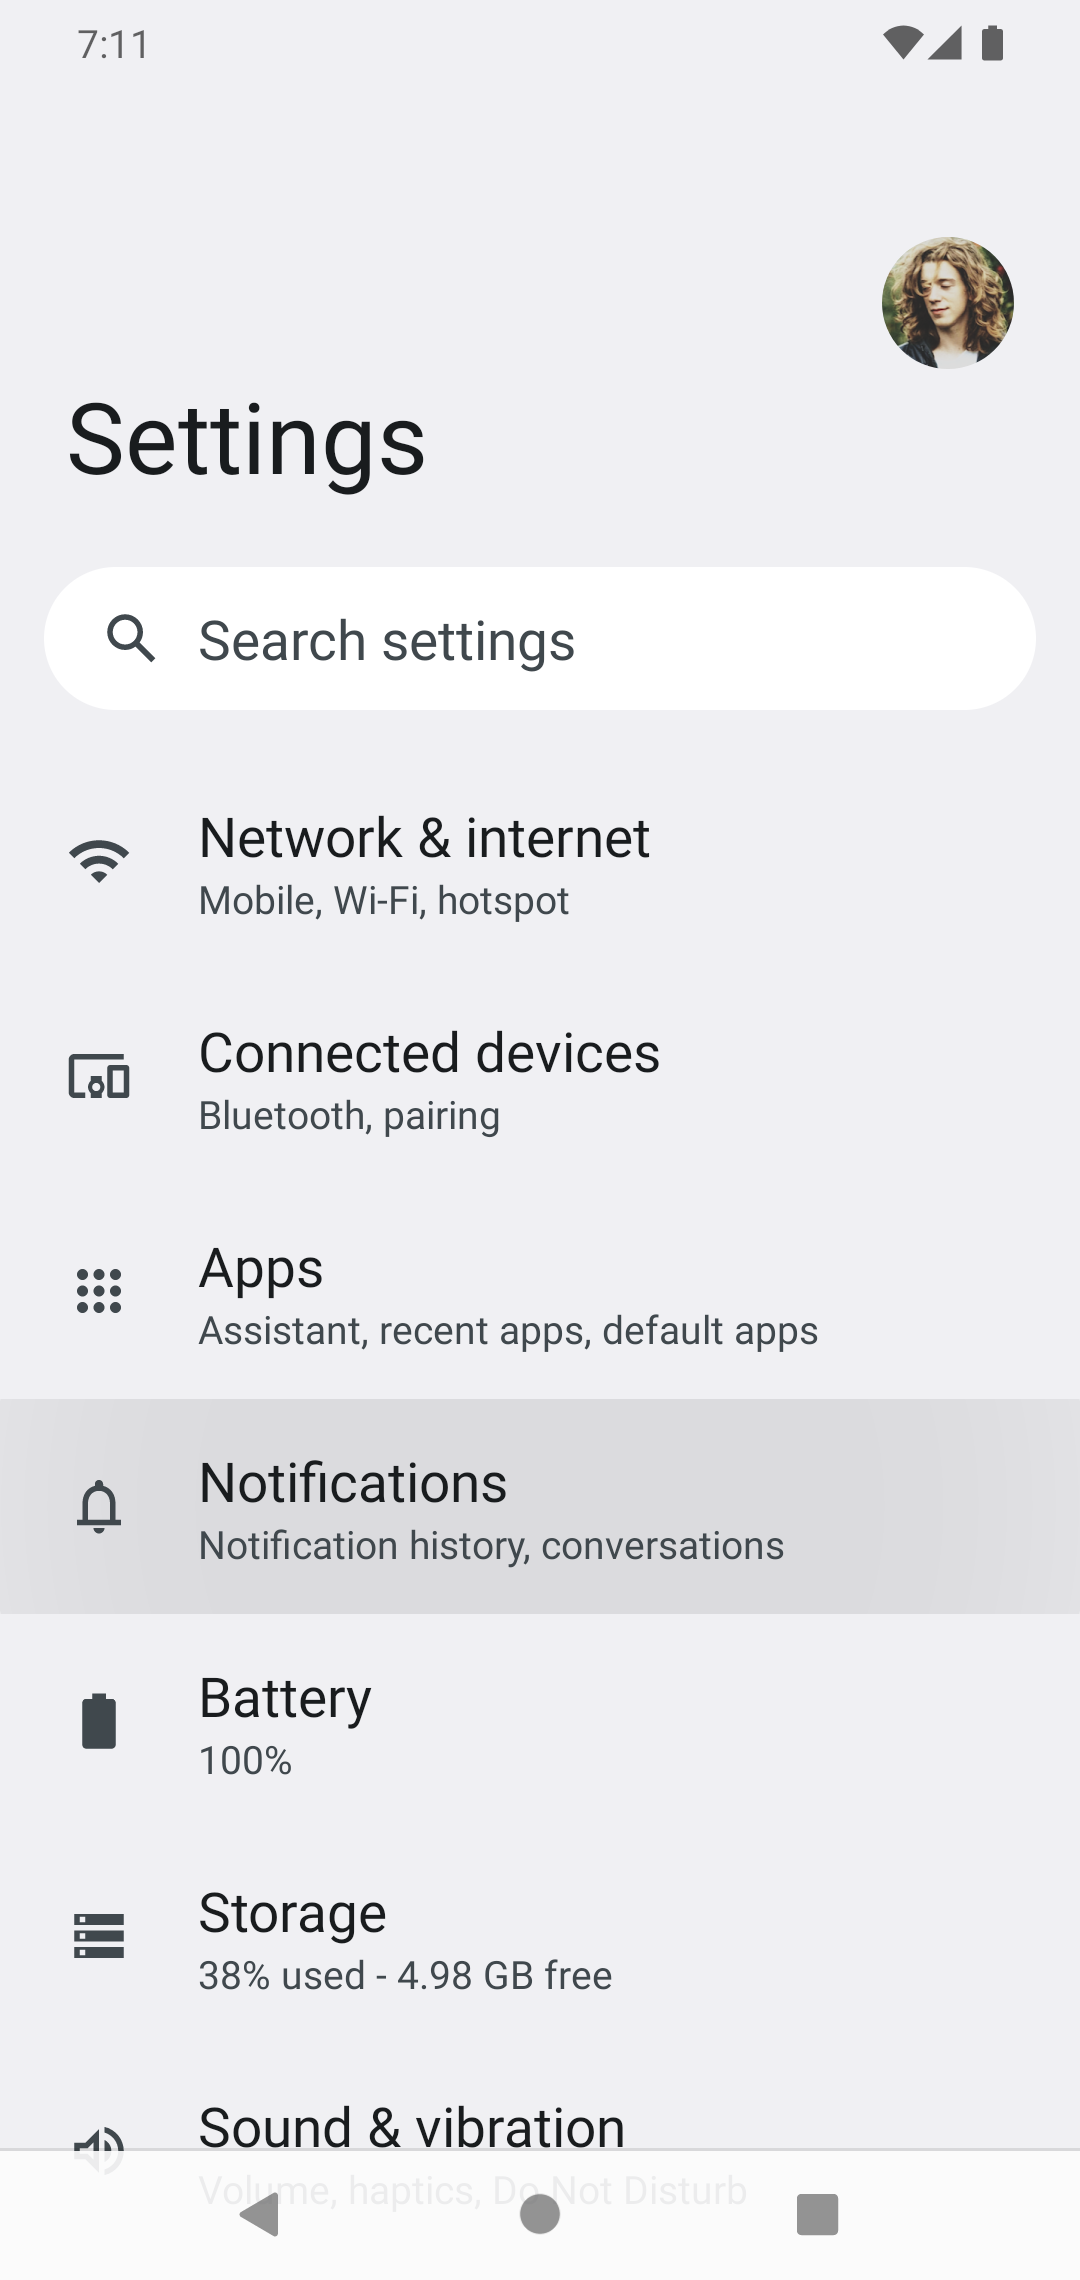 Settings menu on an Android phone.